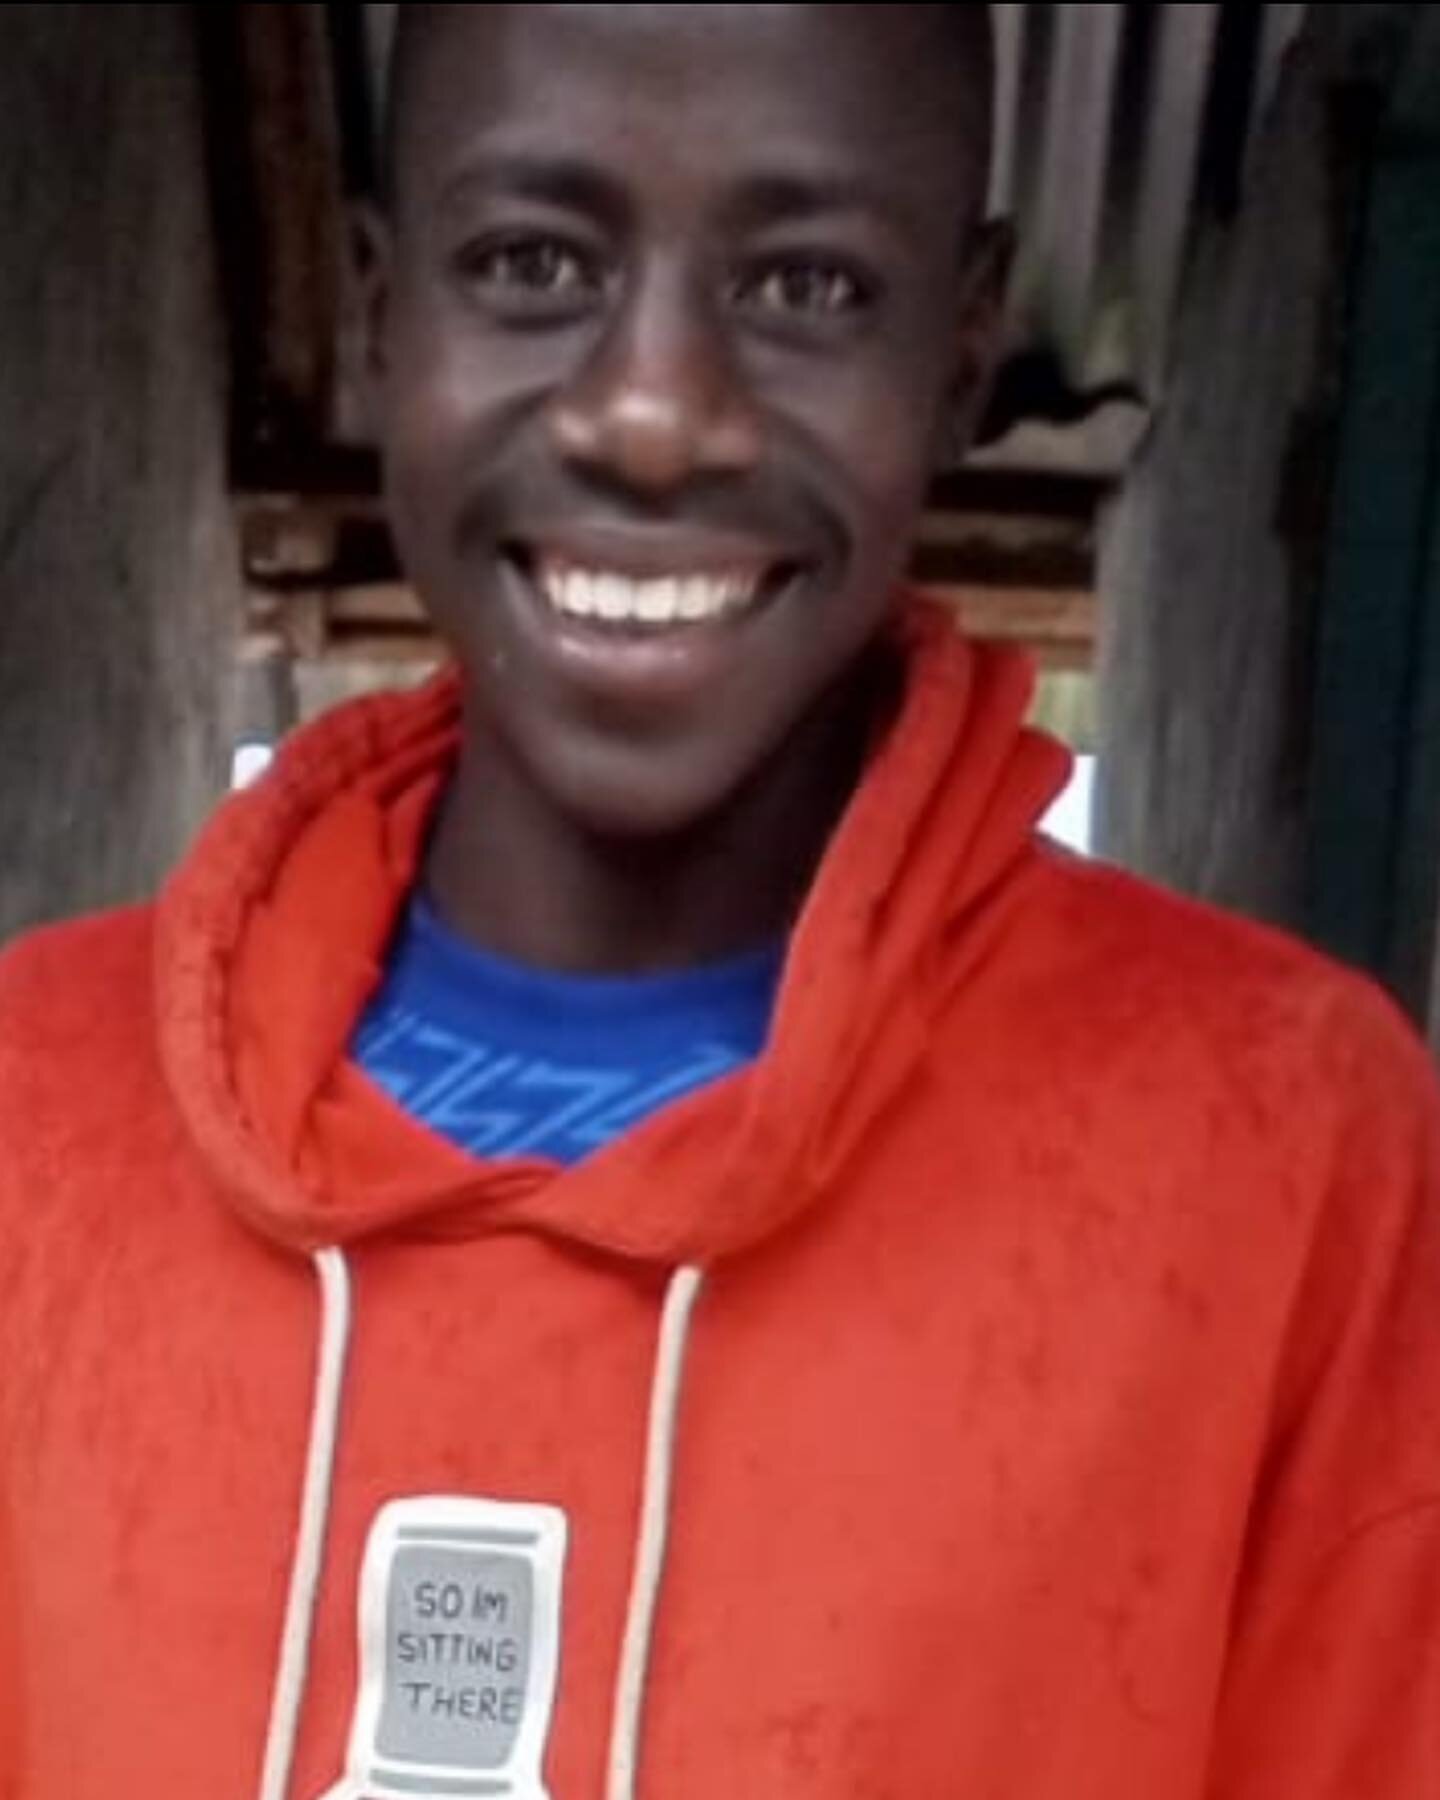 Brian is a former street kid who lived a difficult life- navigating each day completely on his own. He was addicted to sniffing glue and struggled to have enough food. A few years ago, through our partnership with local social services in Kenya, Bria